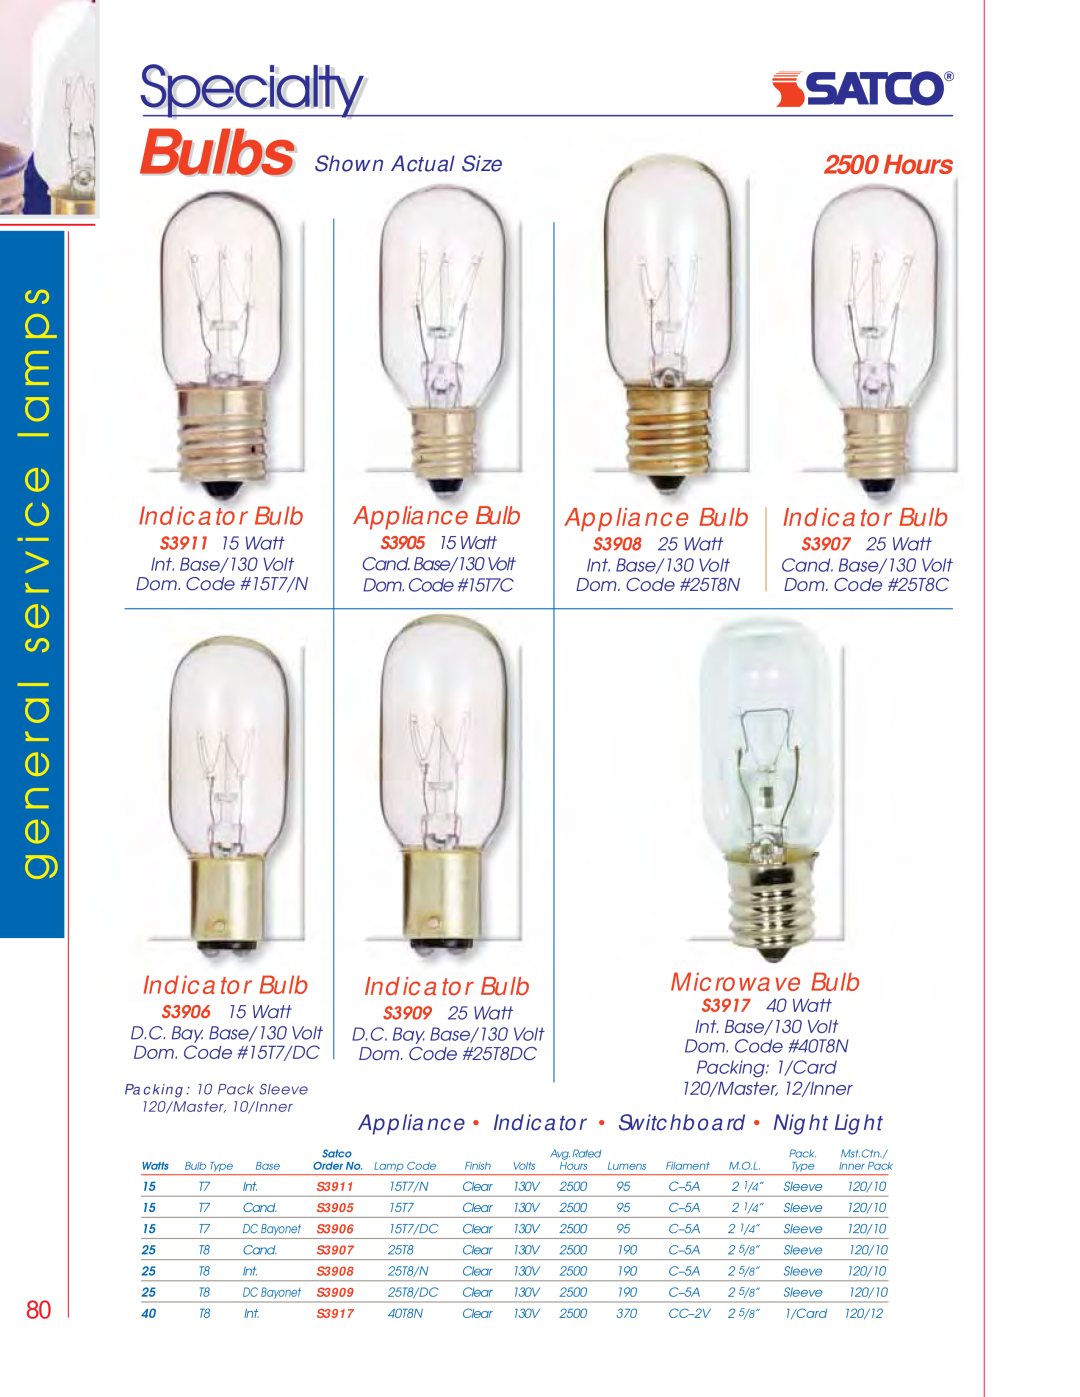 Satco Products S3680, S3681 Specialtyi l, Indicator Bulb, Appliance Bulb, Microwave Bulb, Bulbs Shown Actual Size, Hours 